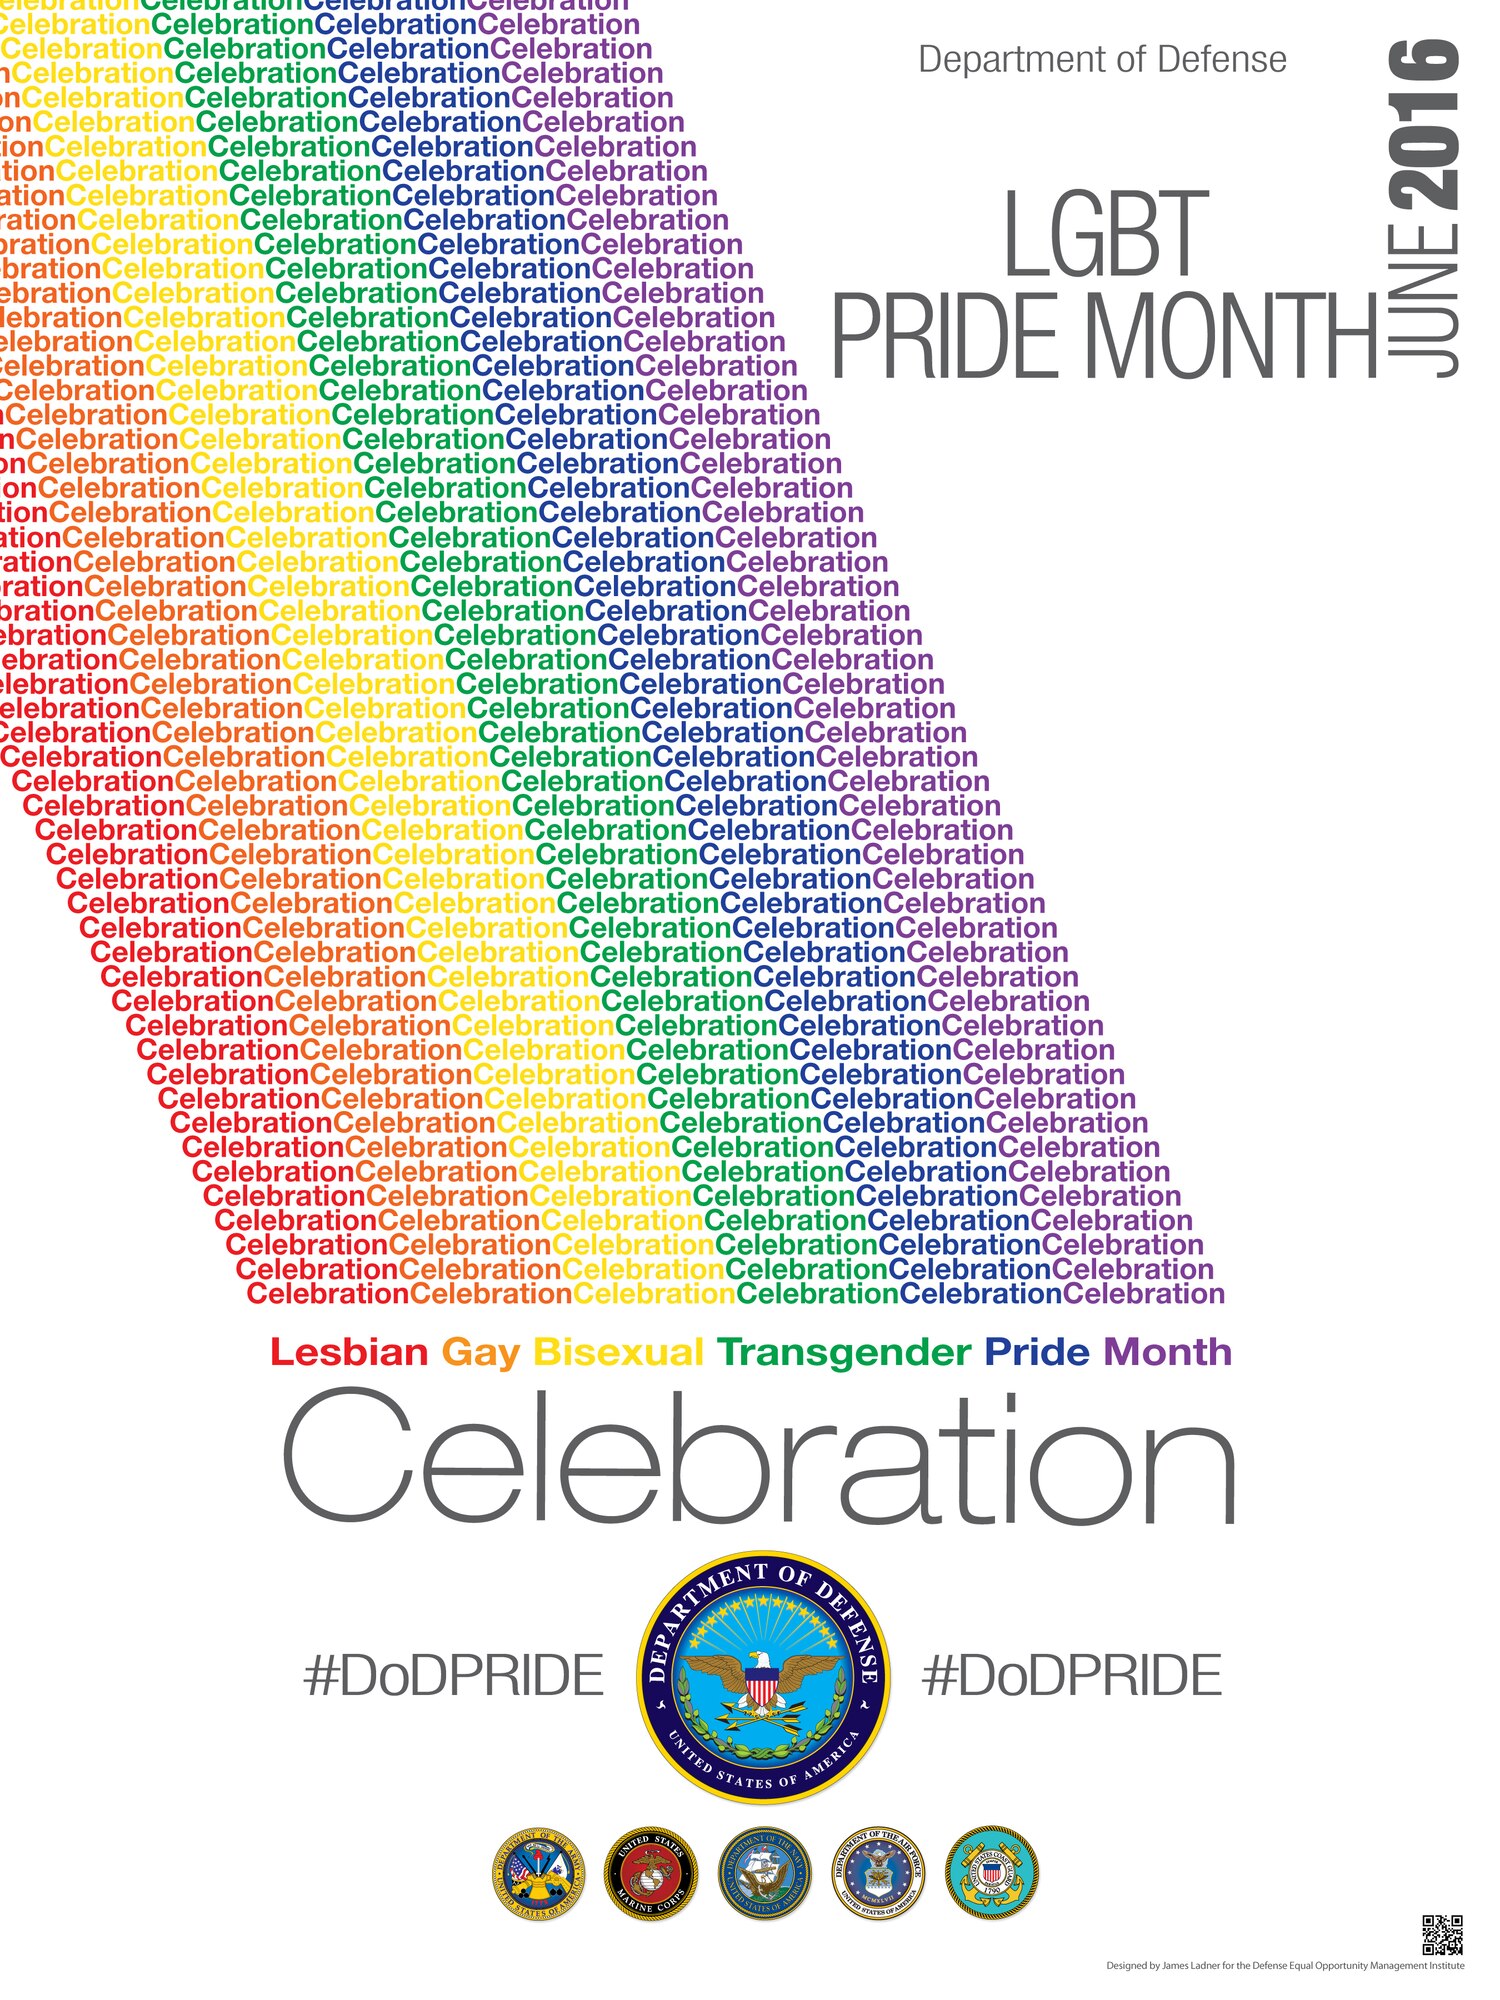 MacDill Air Force Base, Florida will celebrate June’s Lesbian, Gay, Bisexual, and Transgender Pride Month with a luncheon and color run. Individuals with base access are welcome to attend both events. The luncheon will be held on June 14 at the base chapel and the color run will be at seascapes on June 29. (Courtesy graphic)